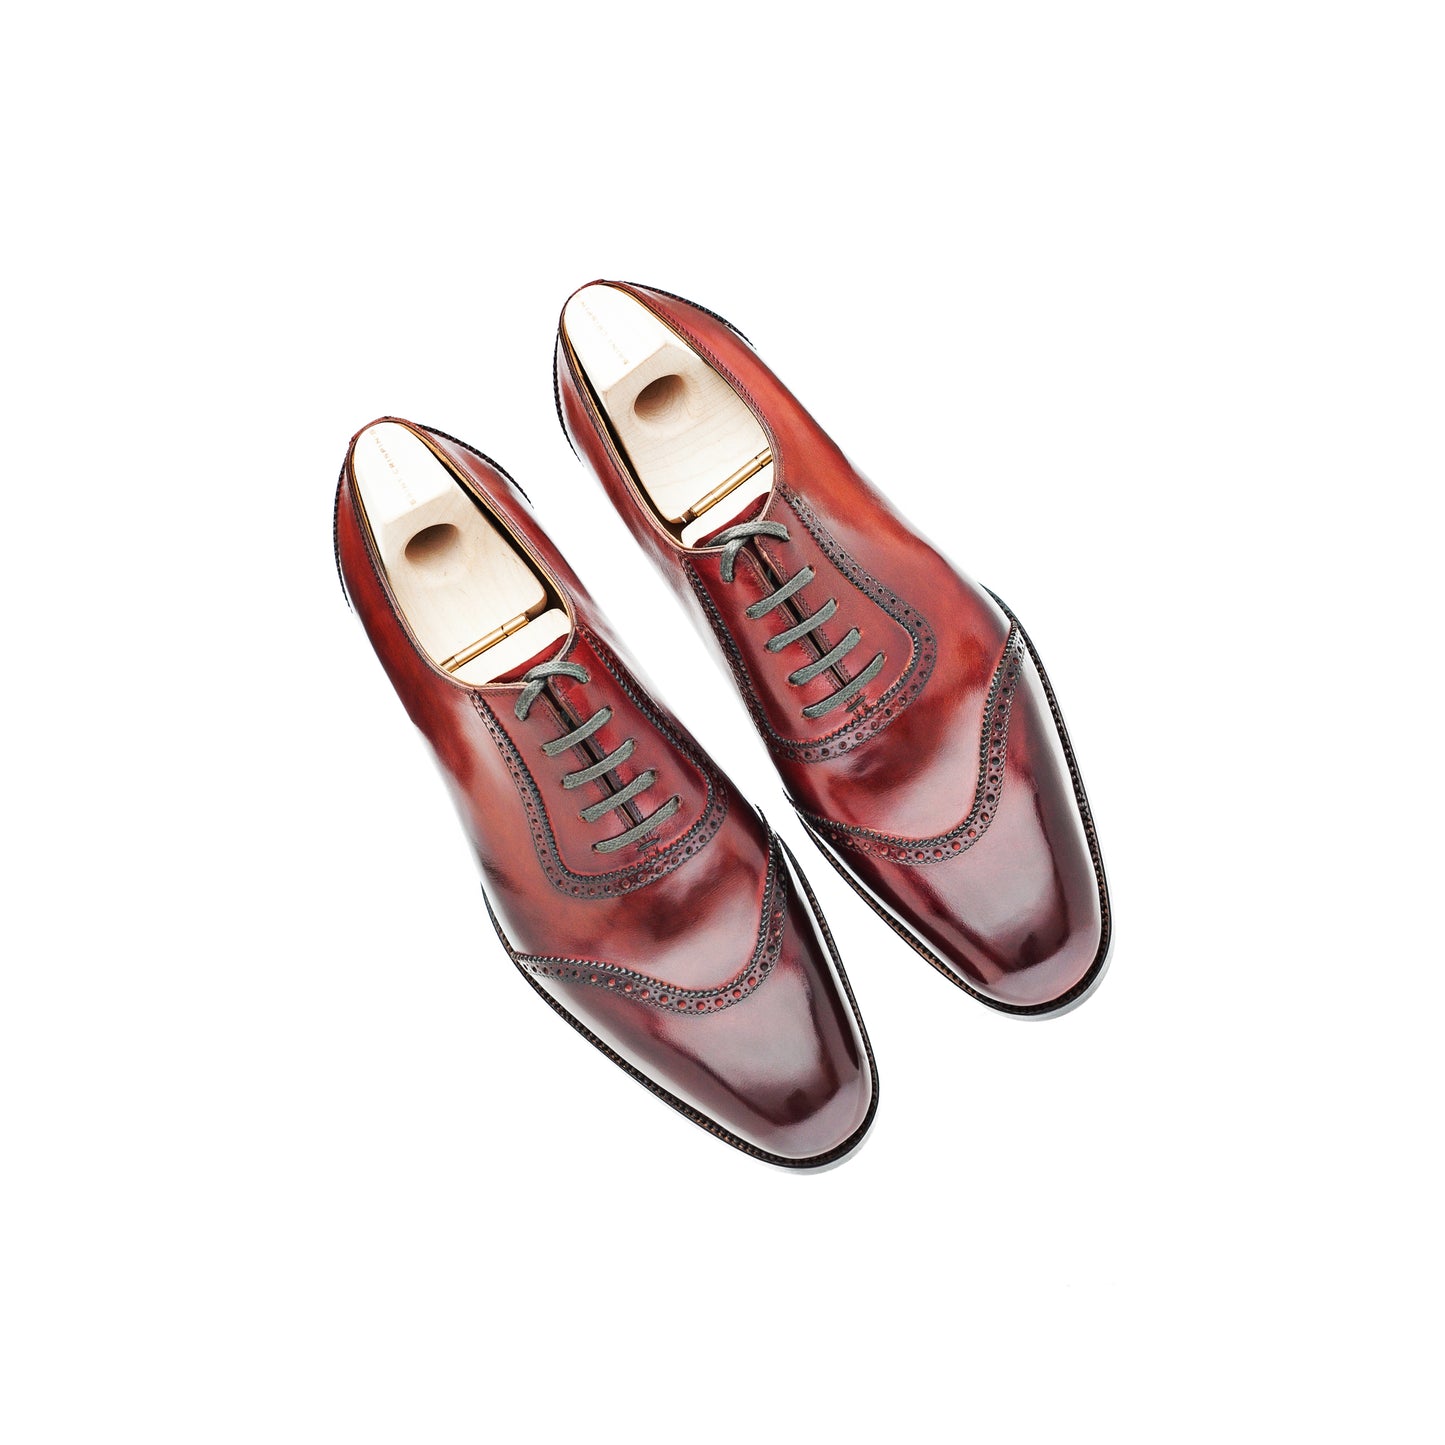 Queens - Oxford, round wing tip with brogueing